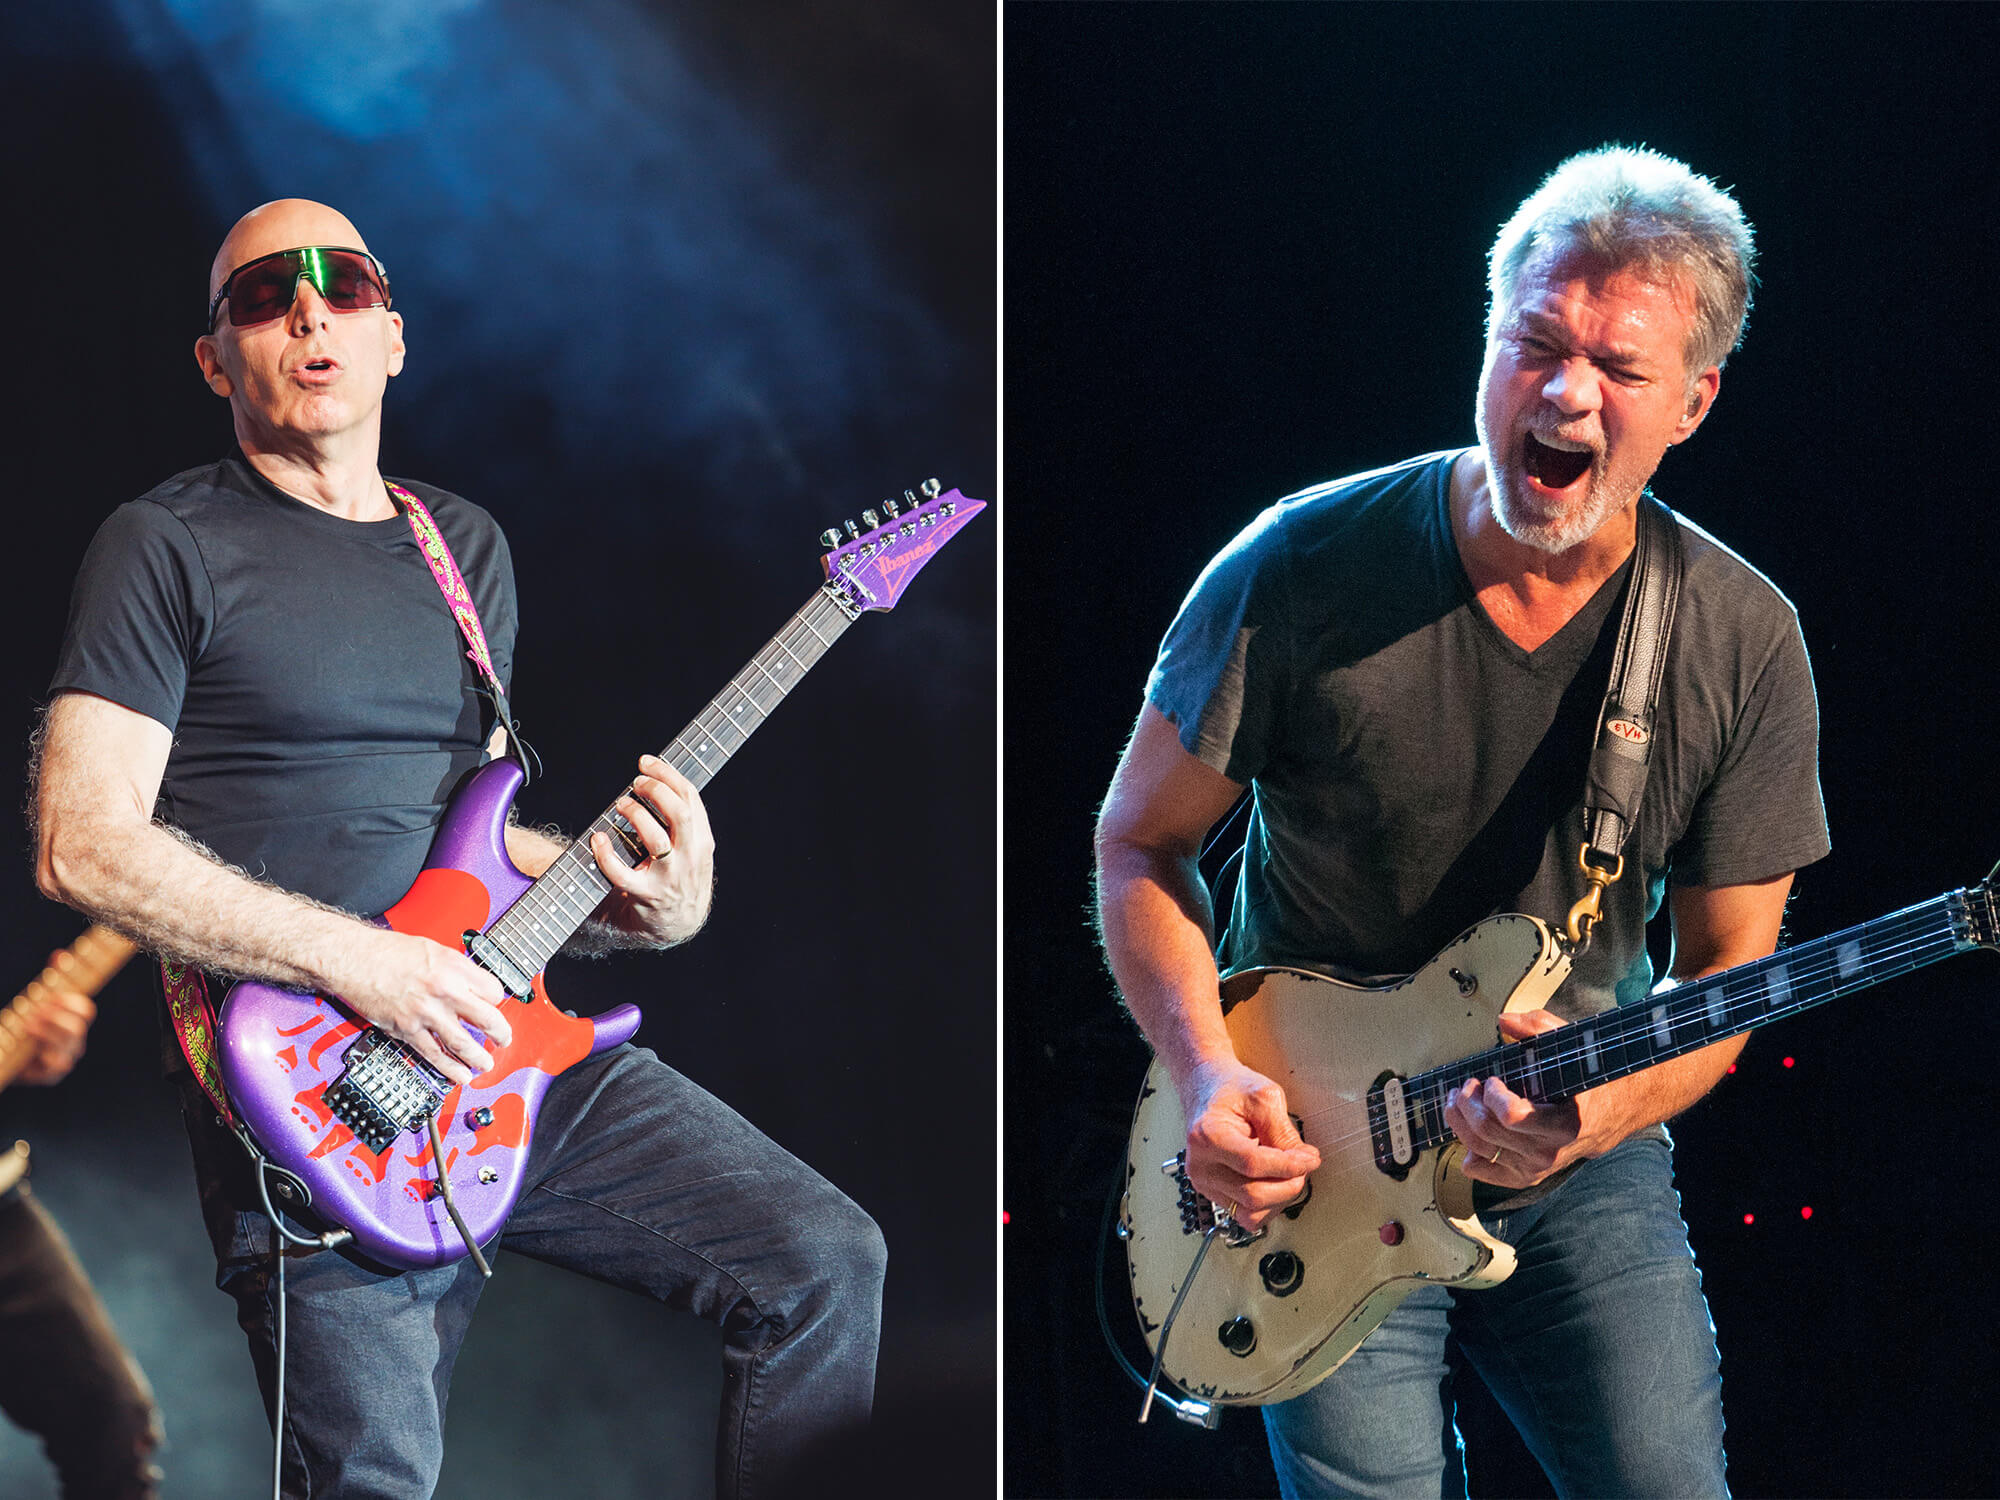 Joe Satriani (left) and Eddie Van Halen (right). Both have their guitars in hand and appear to be mouthing along to the sound of their instrument